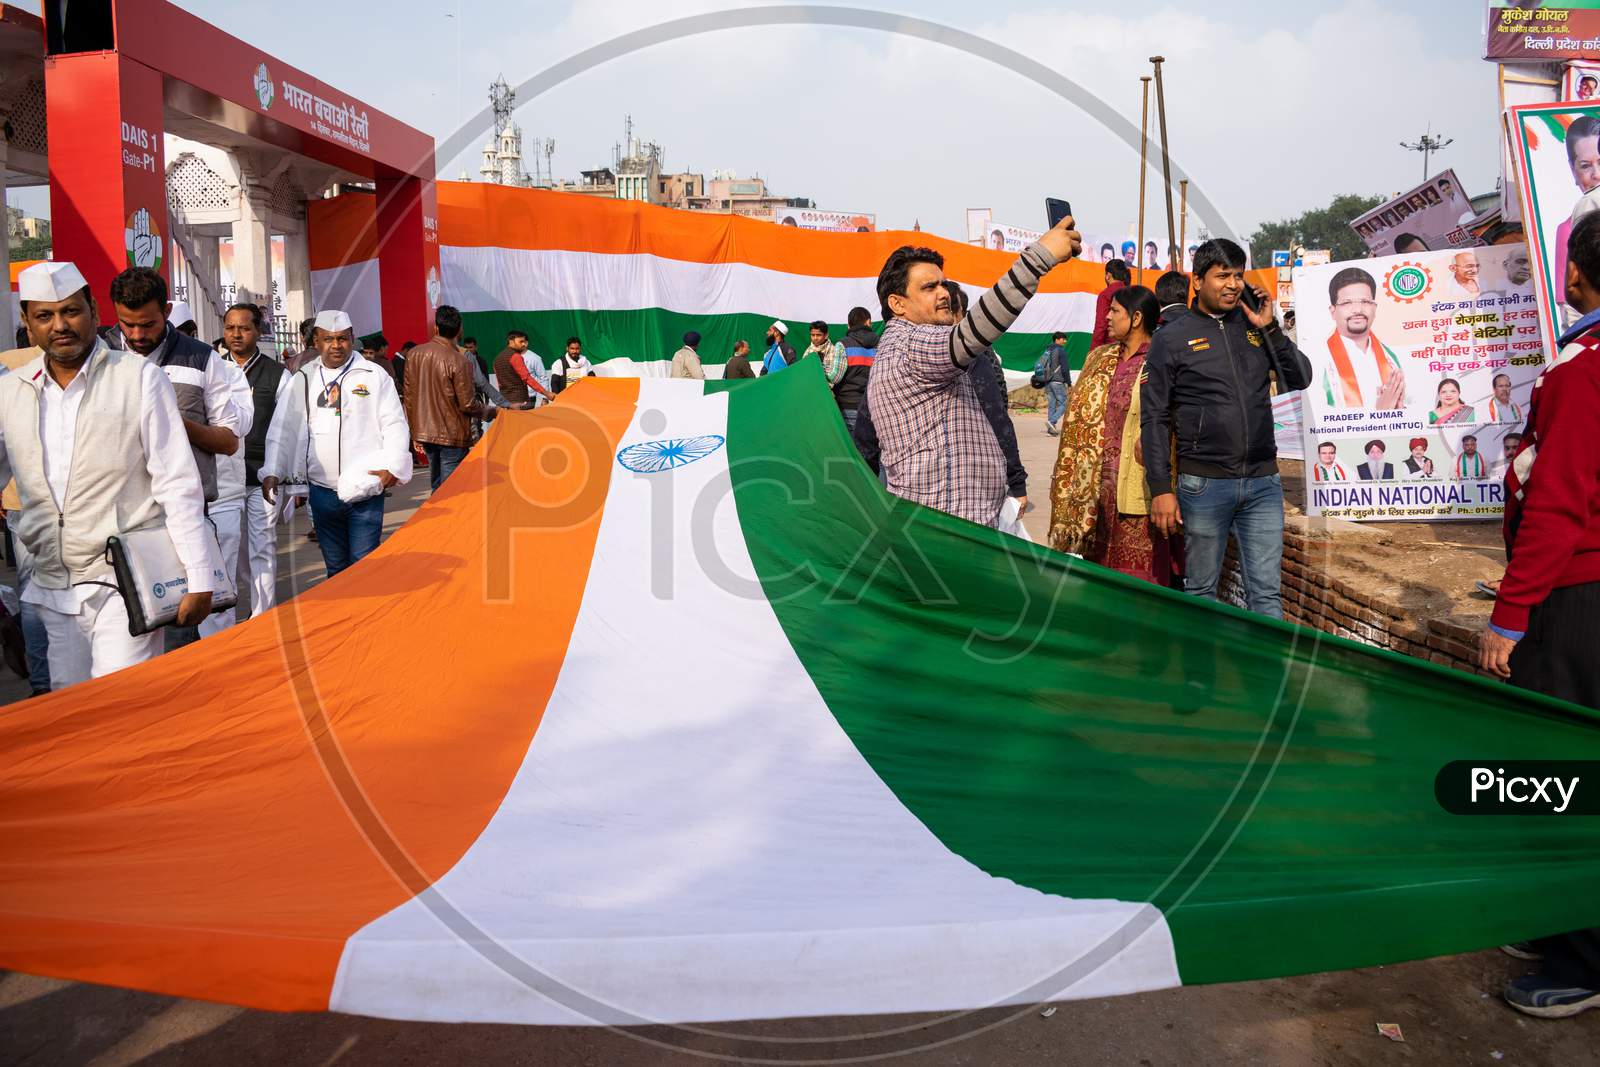 Congress workers carrying Indian flag during 'Bharat Bachao' rally by Congress in Delhi to highlight Modi govt failures